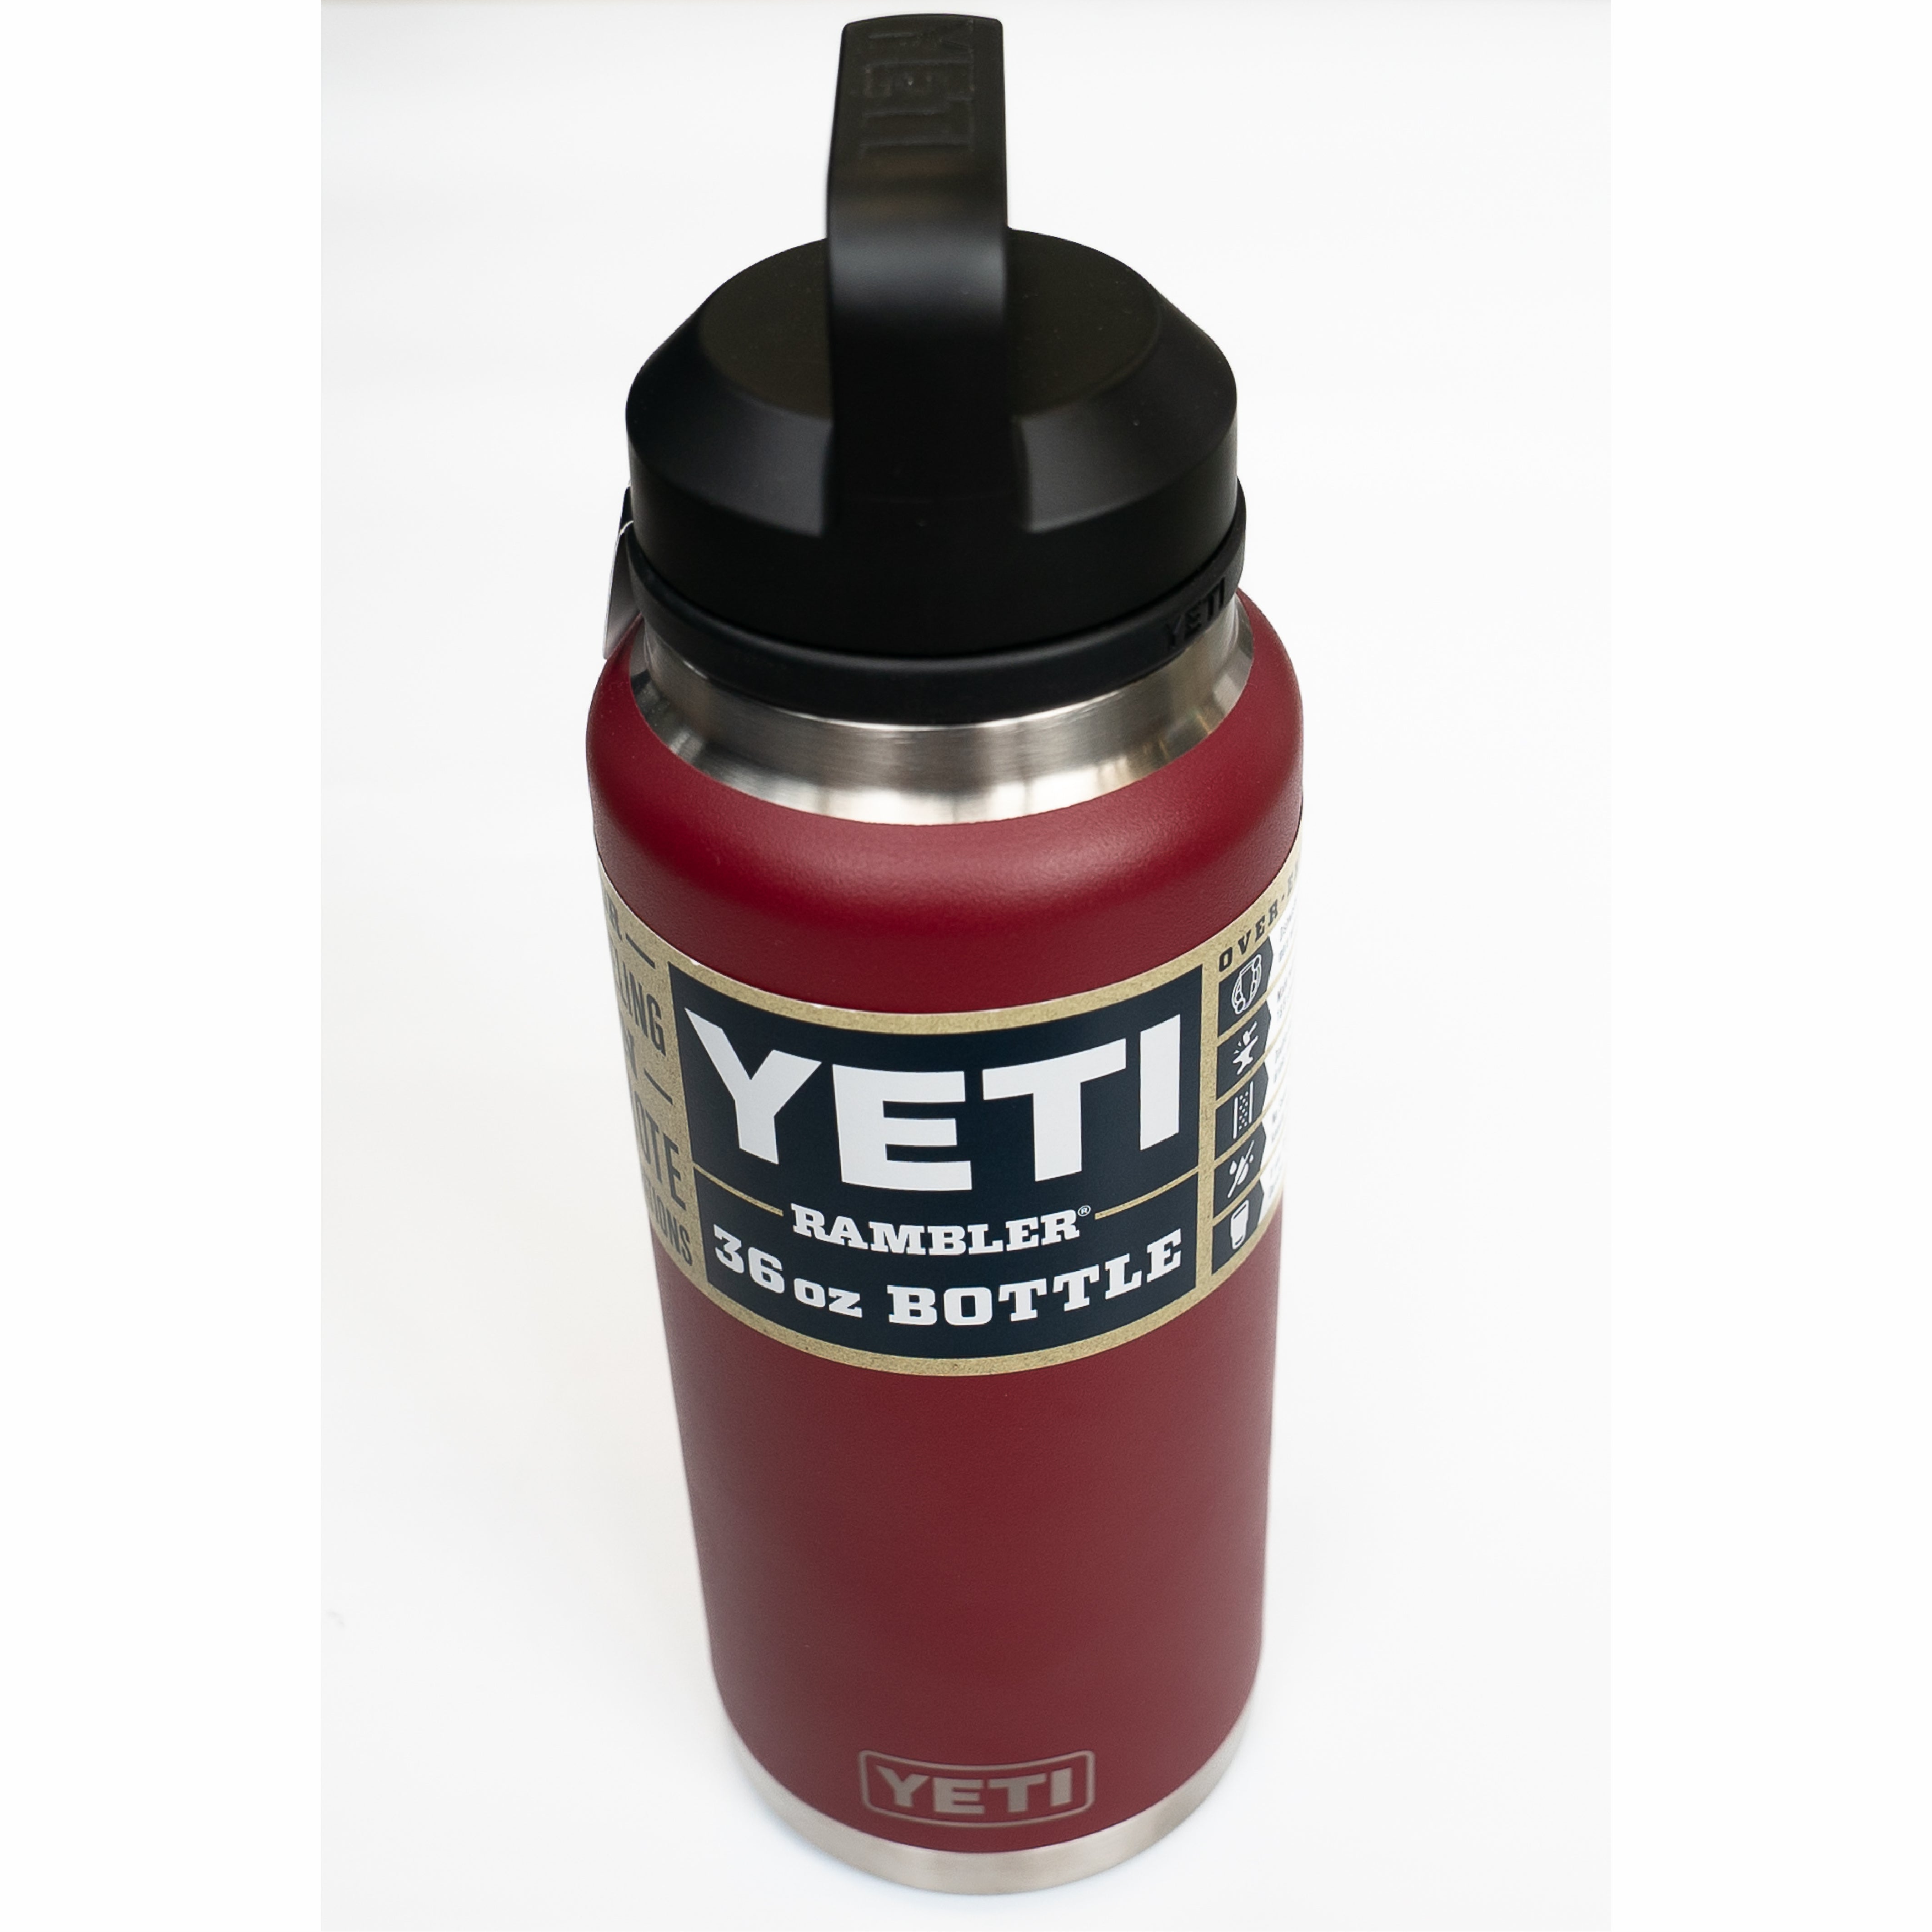 Found my YETI Rambler 36 oz bottle in stock and on sale in a few